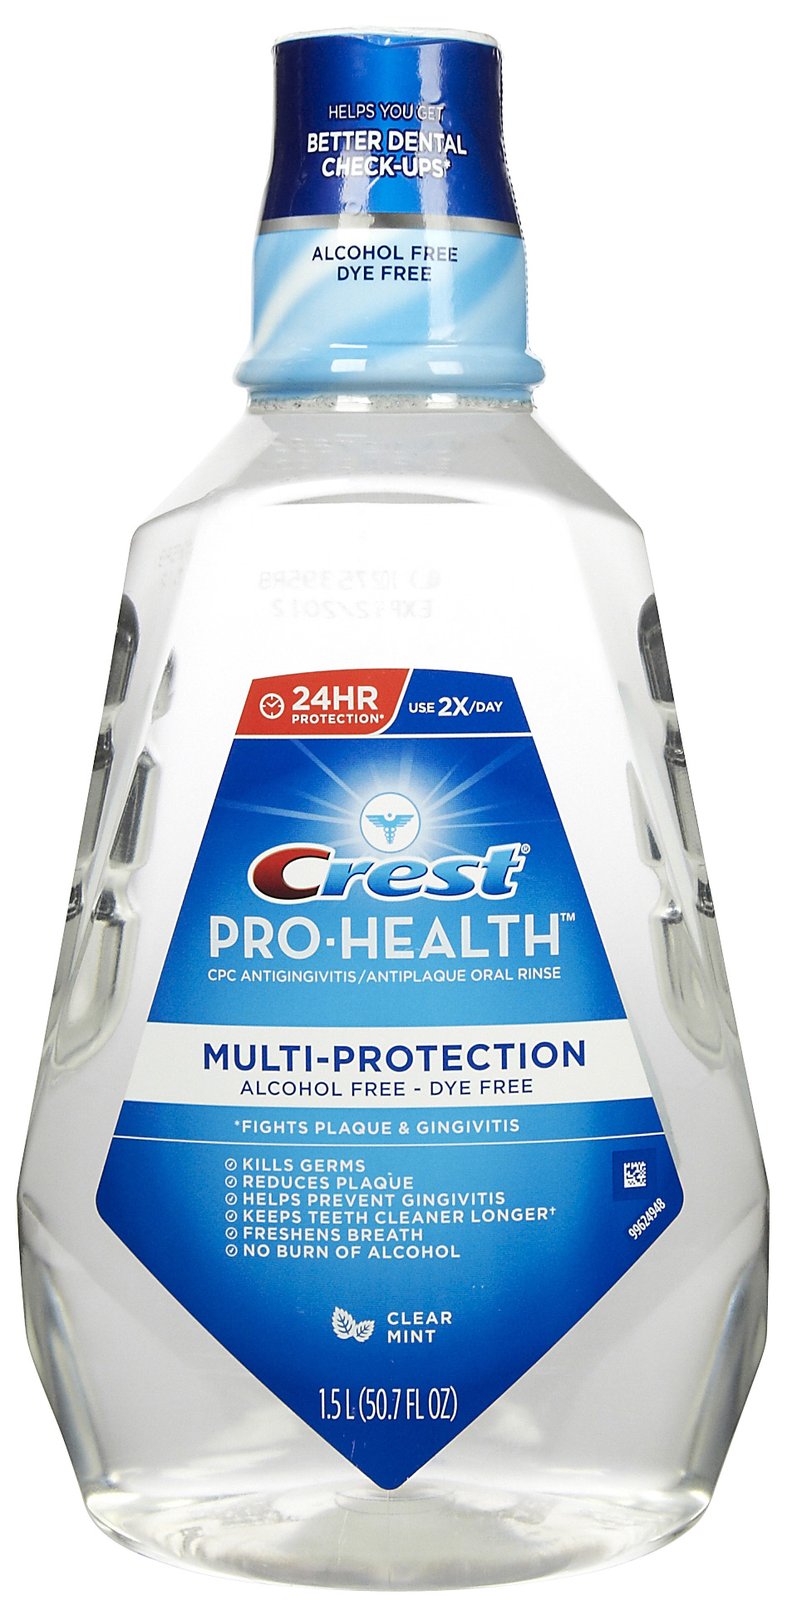 $1.00 off 1 Crest ProHealth Rinse 458mL or larger Coupon